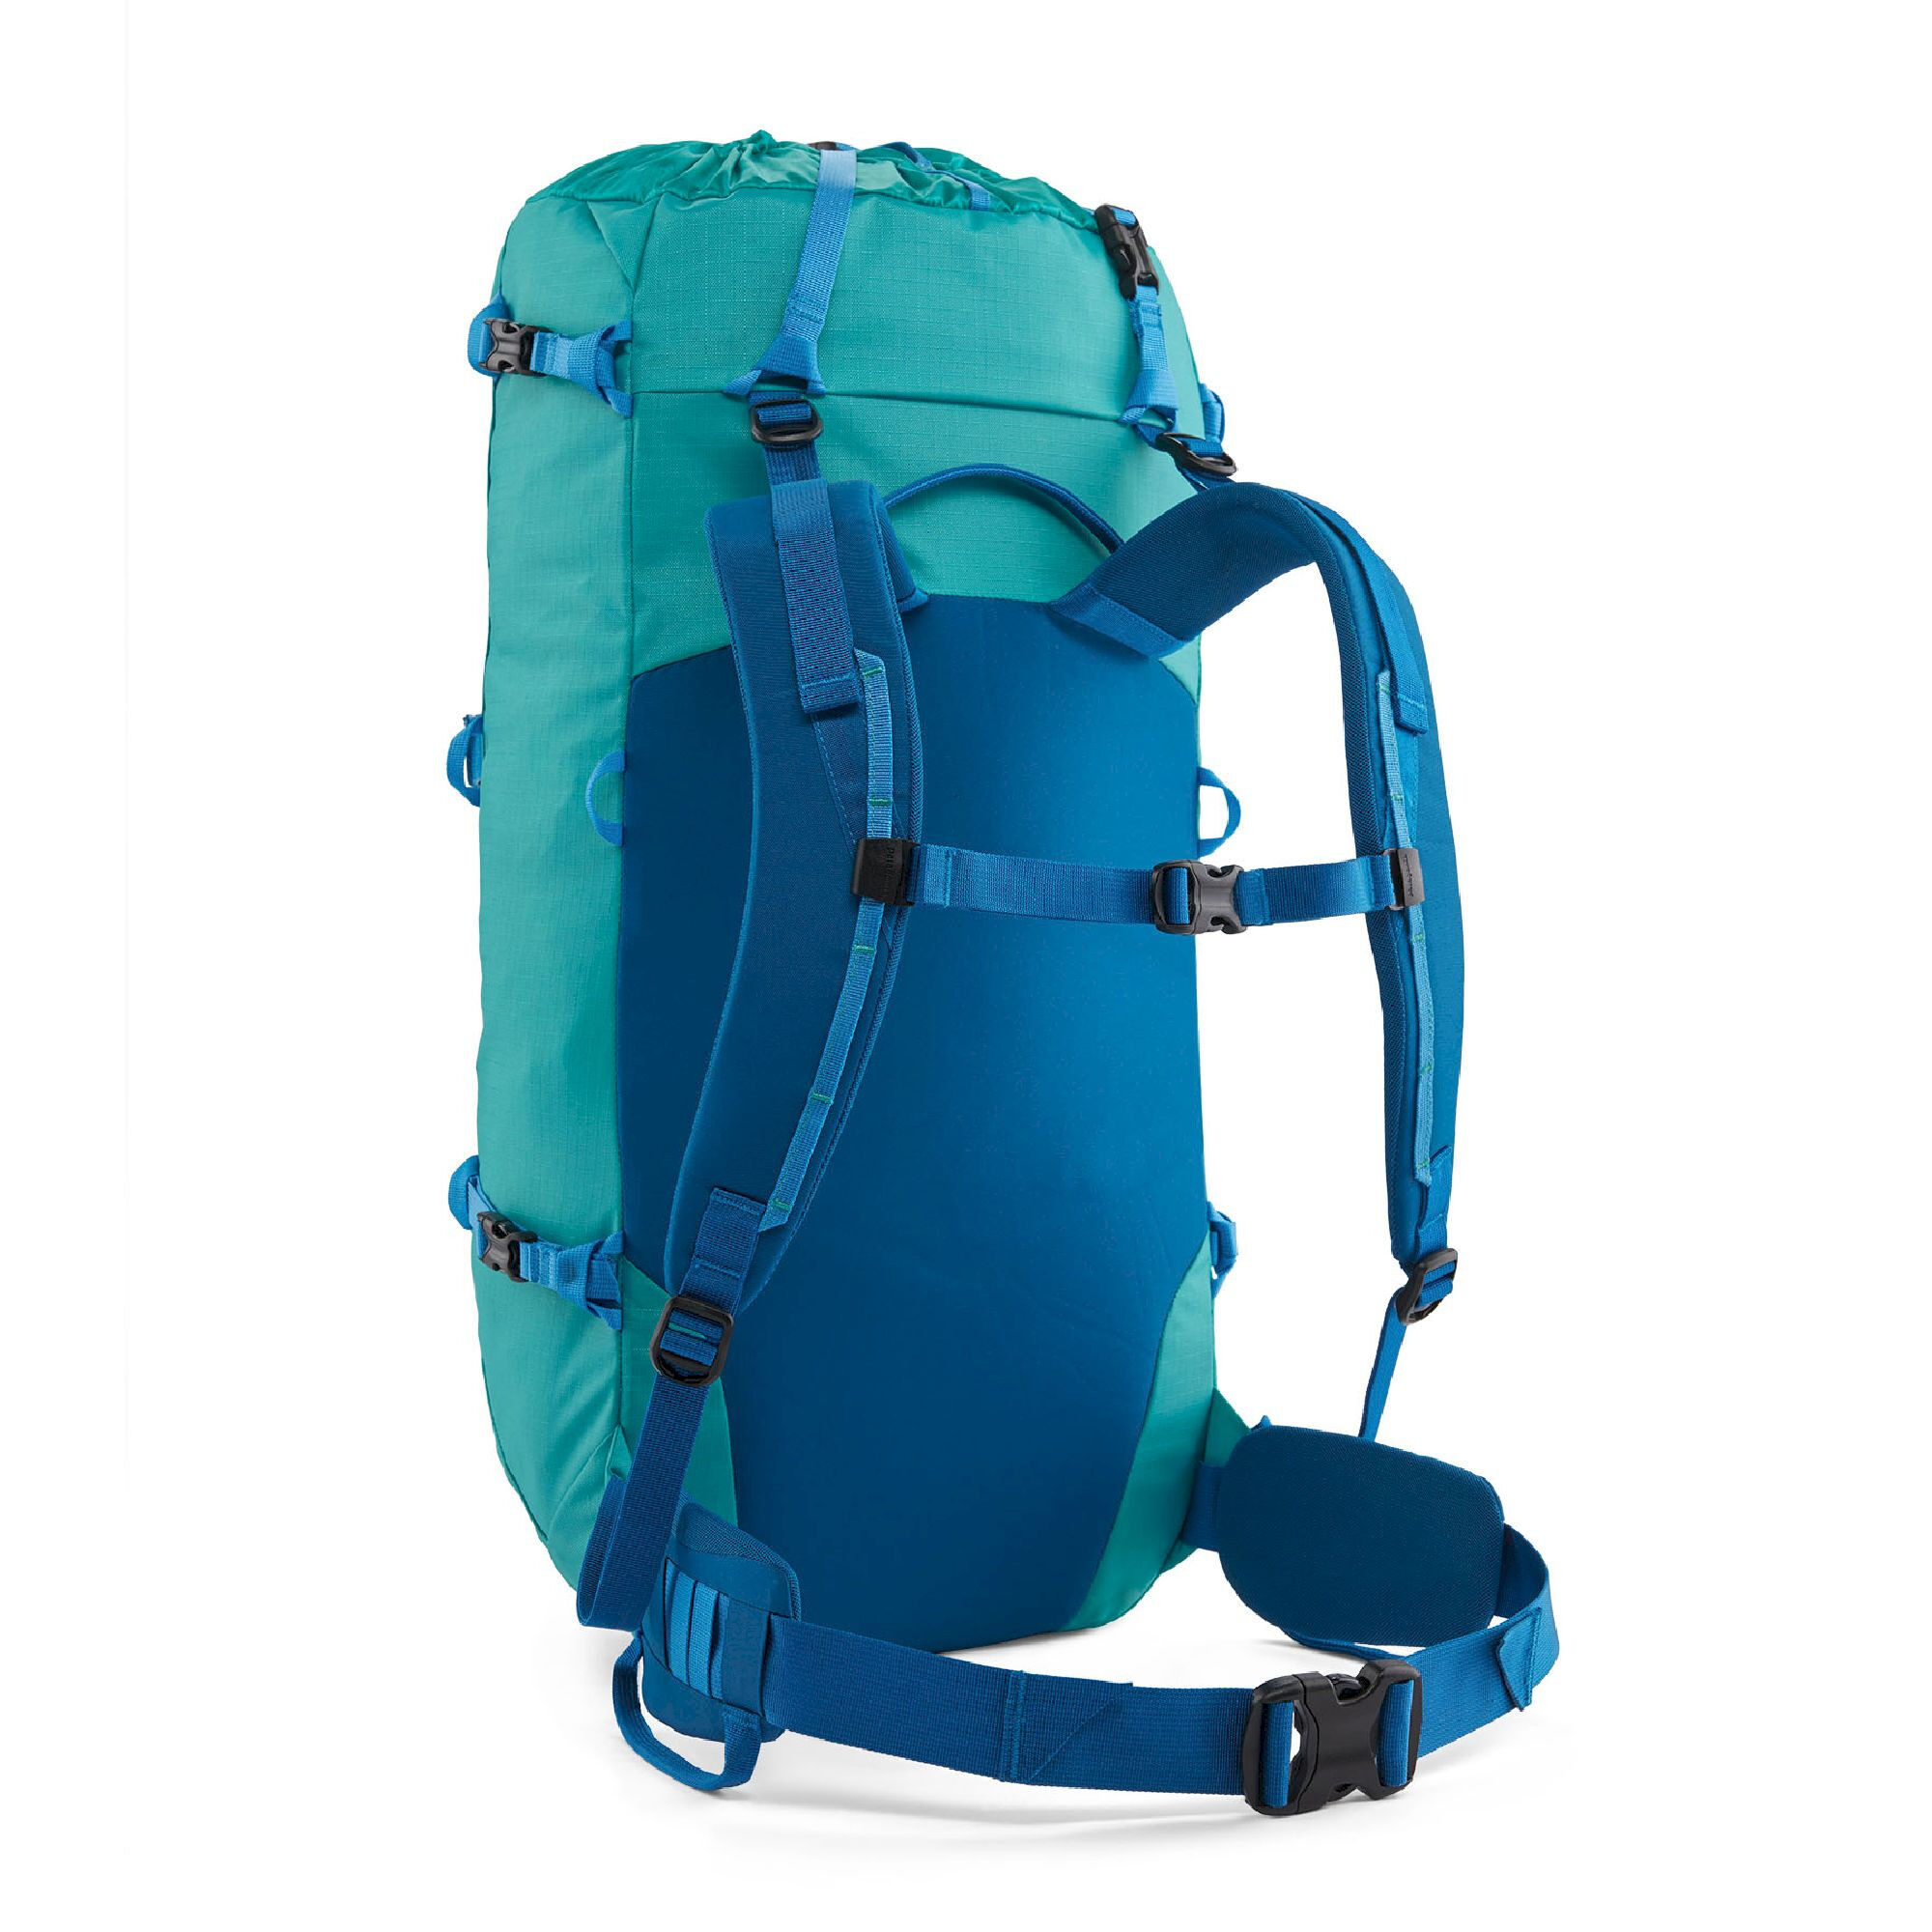 Patagonia Ascensionist 35L - Touring backpack